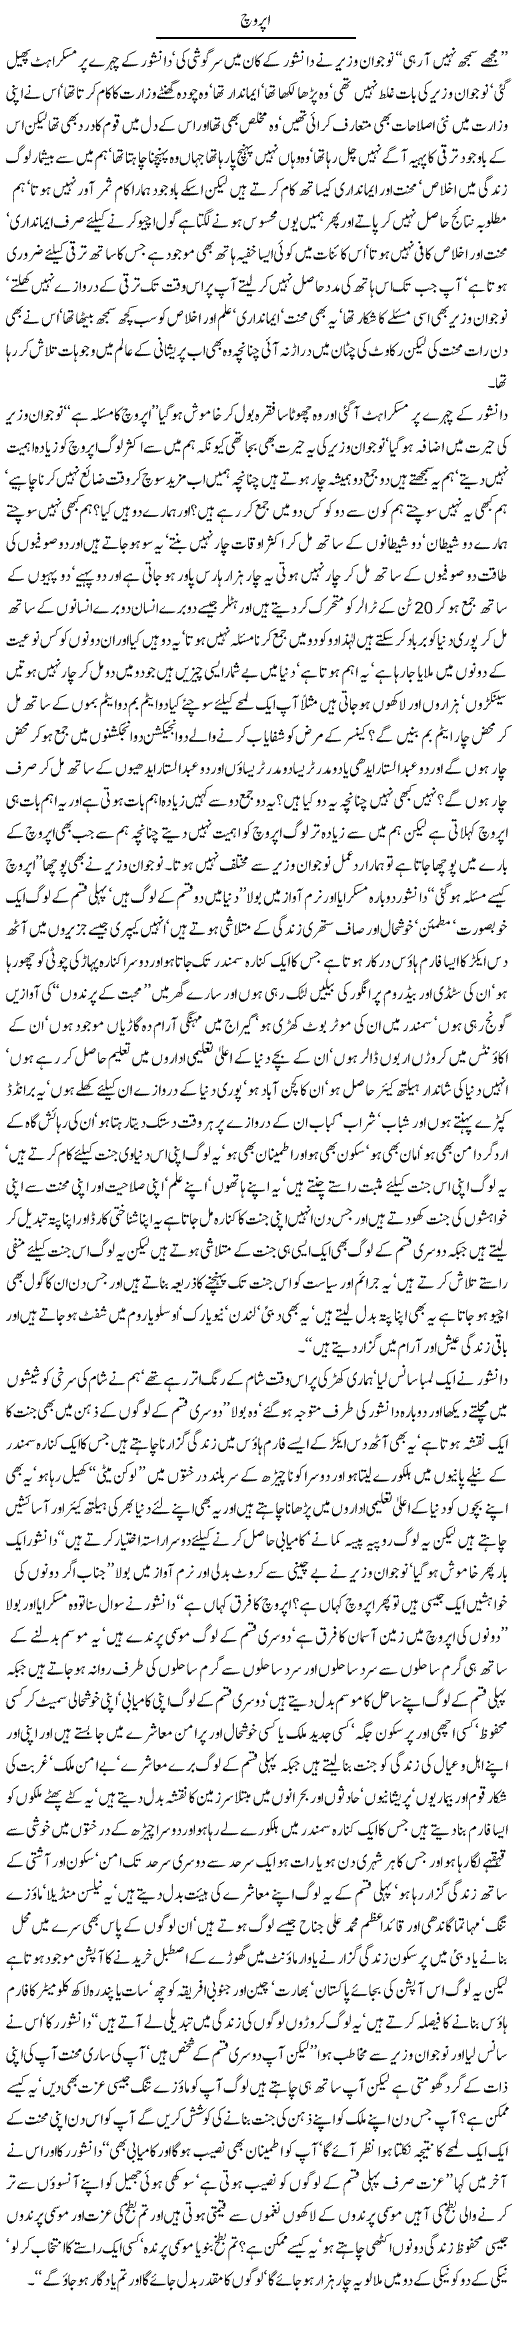 Approach By Javed Chaudhry